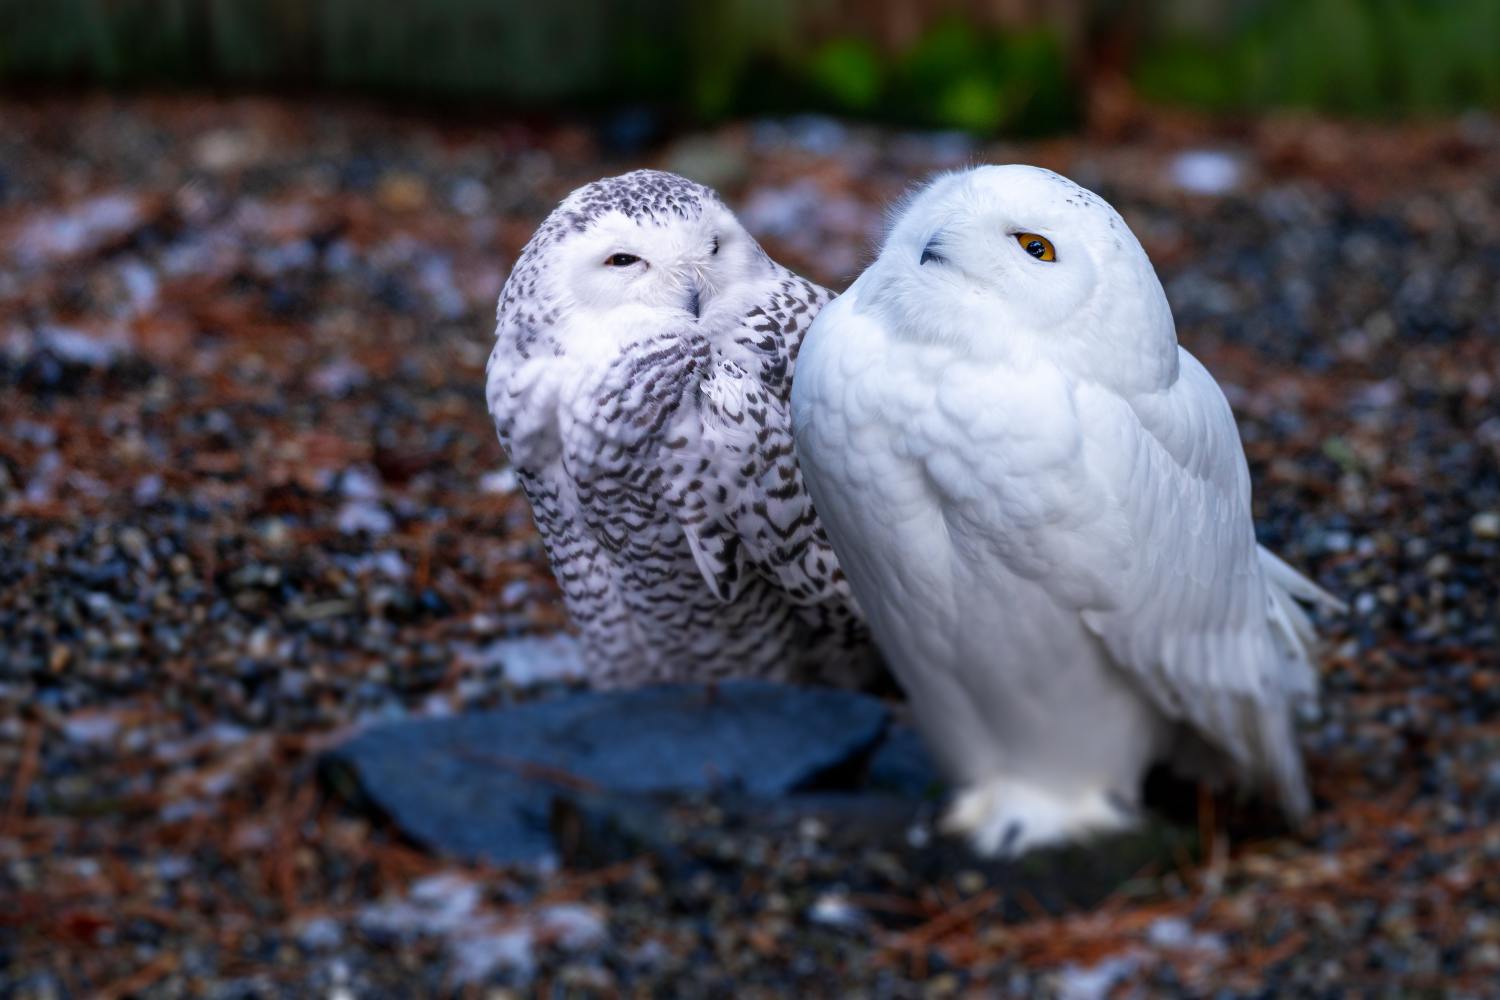 10 facts about baby owls you never knew before